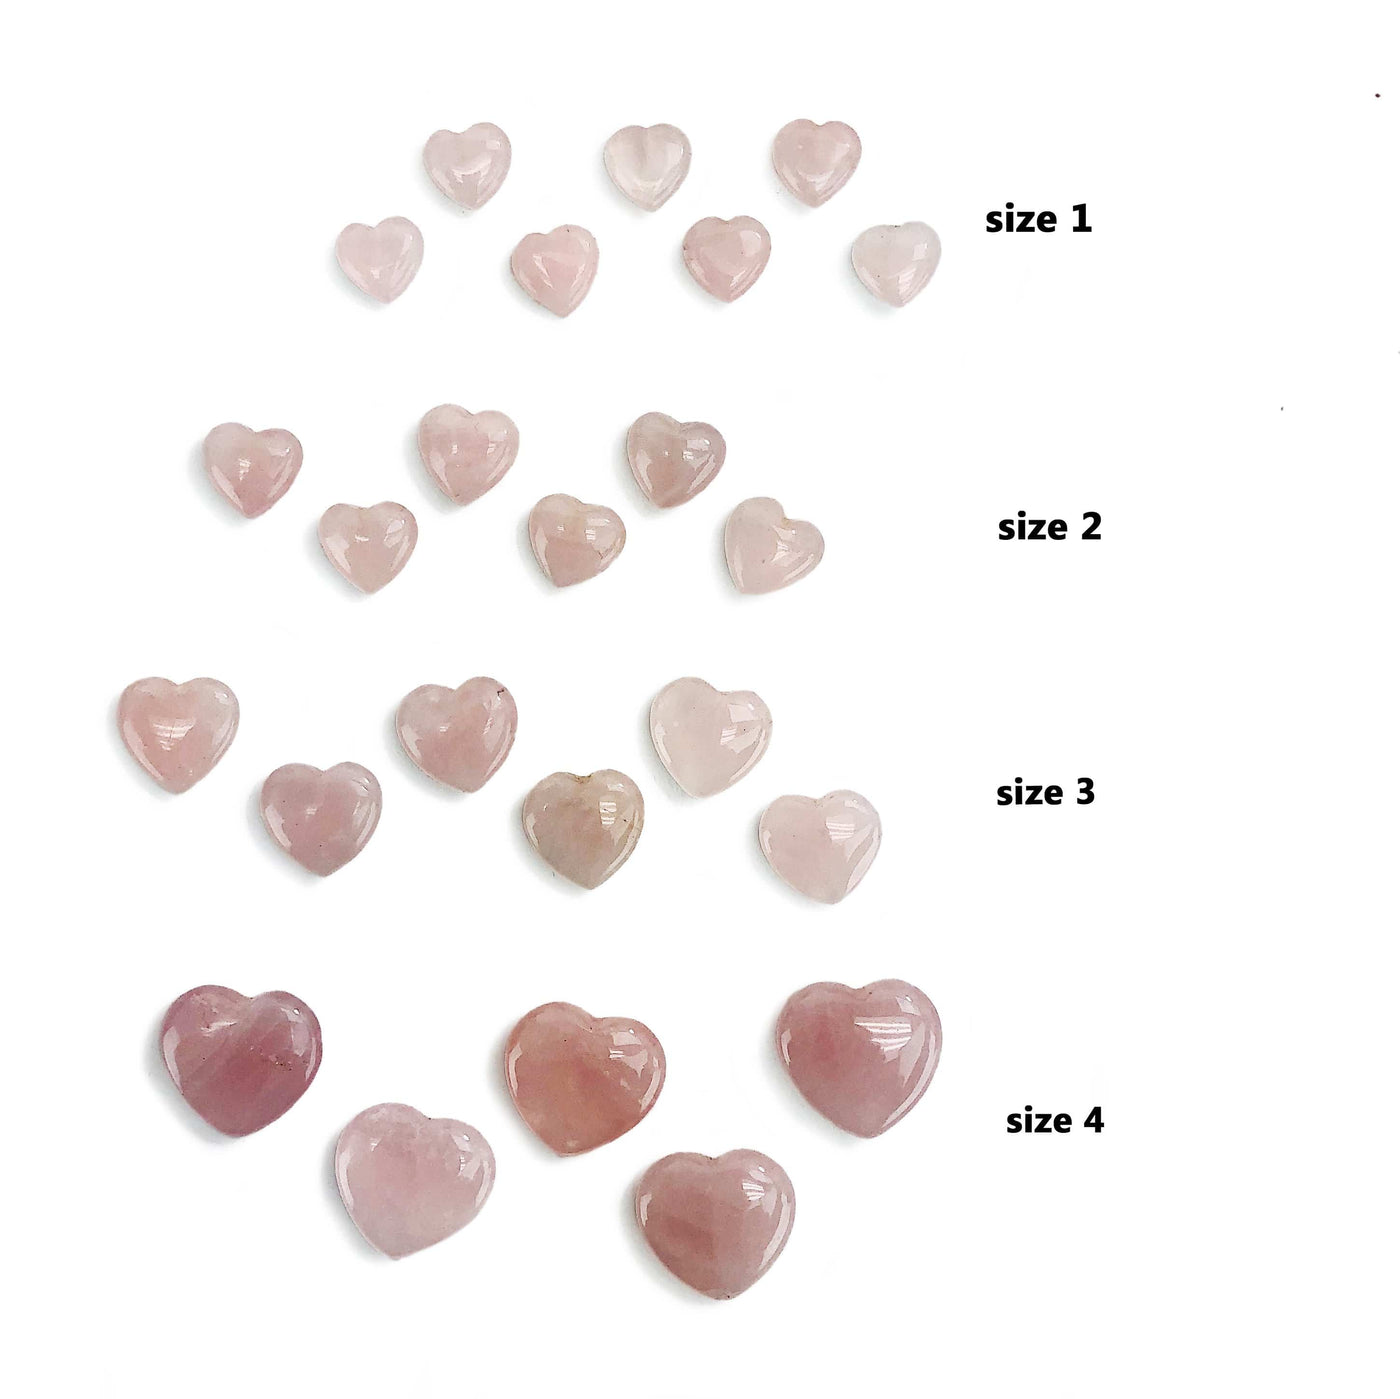 Rose Quartz Hearts separated by size on white background